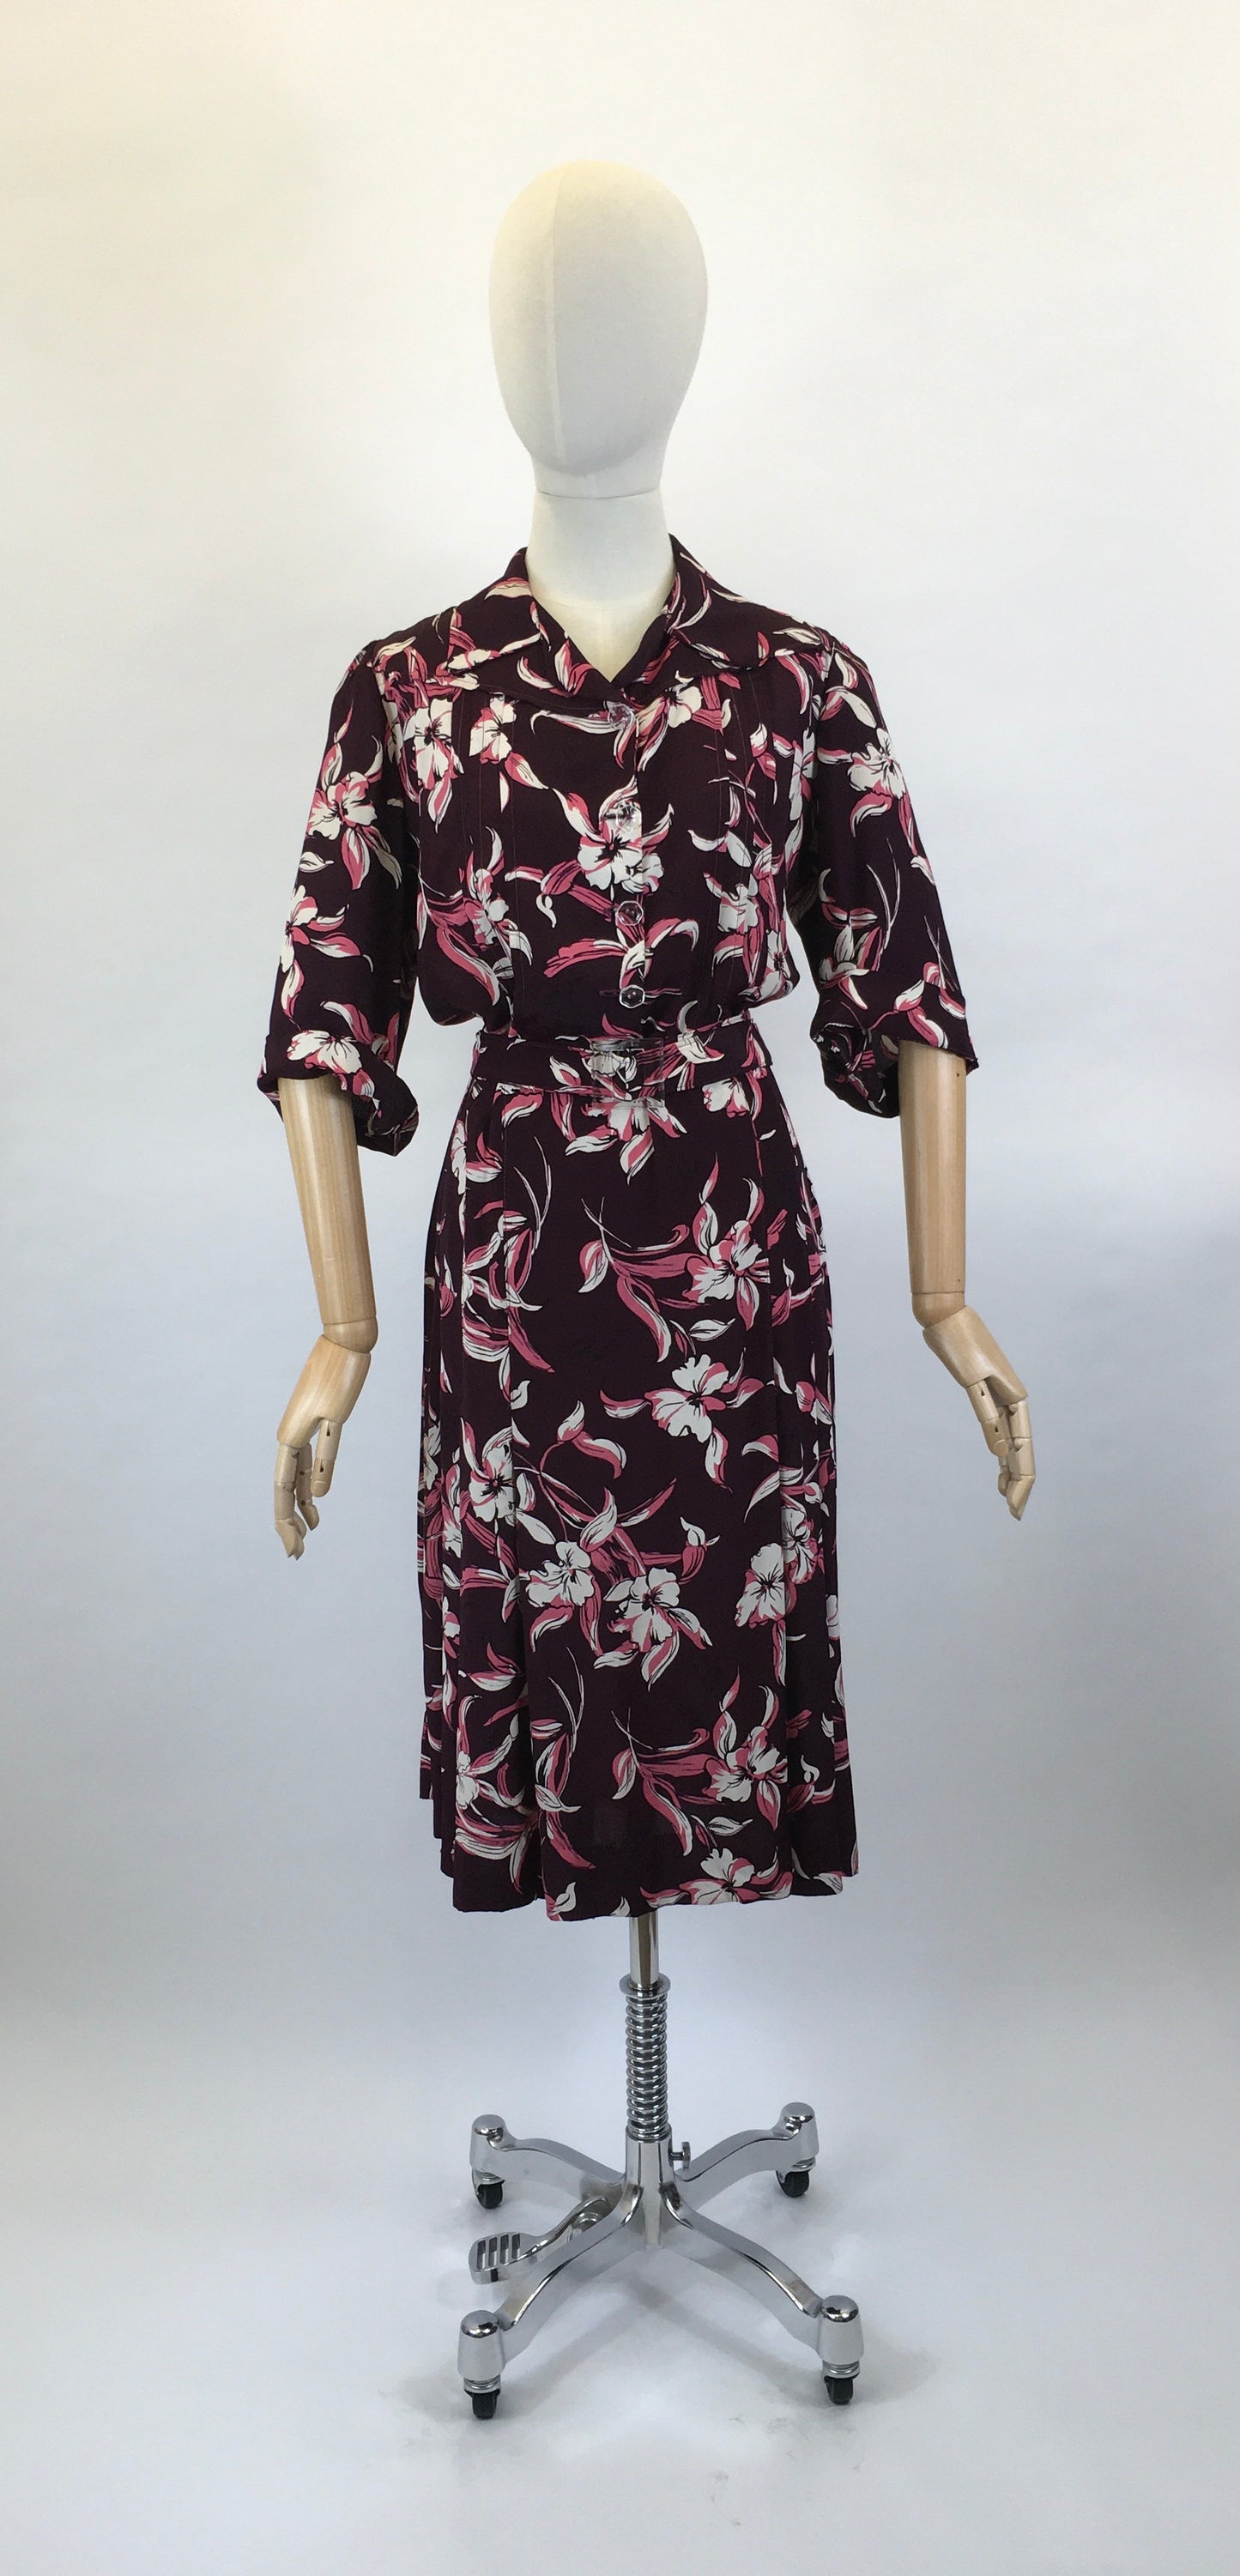 Original 1940’s Stunning Volup Rayon Dress - In A Winter Berry Floral